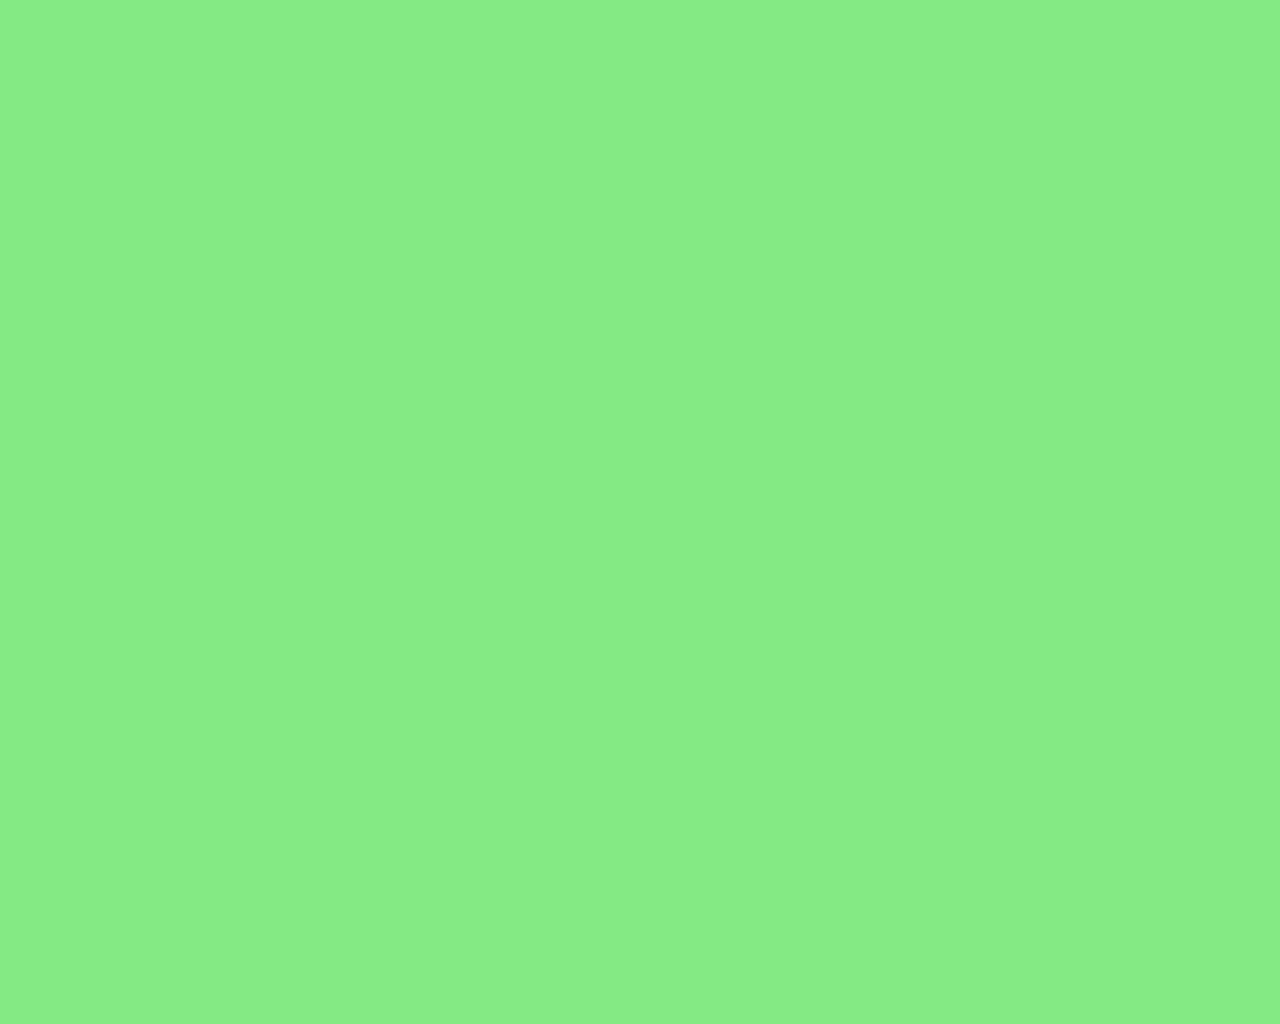 Solid Green Edge 929 background cool new plain simple HD phone  wallpaper  Peakpx